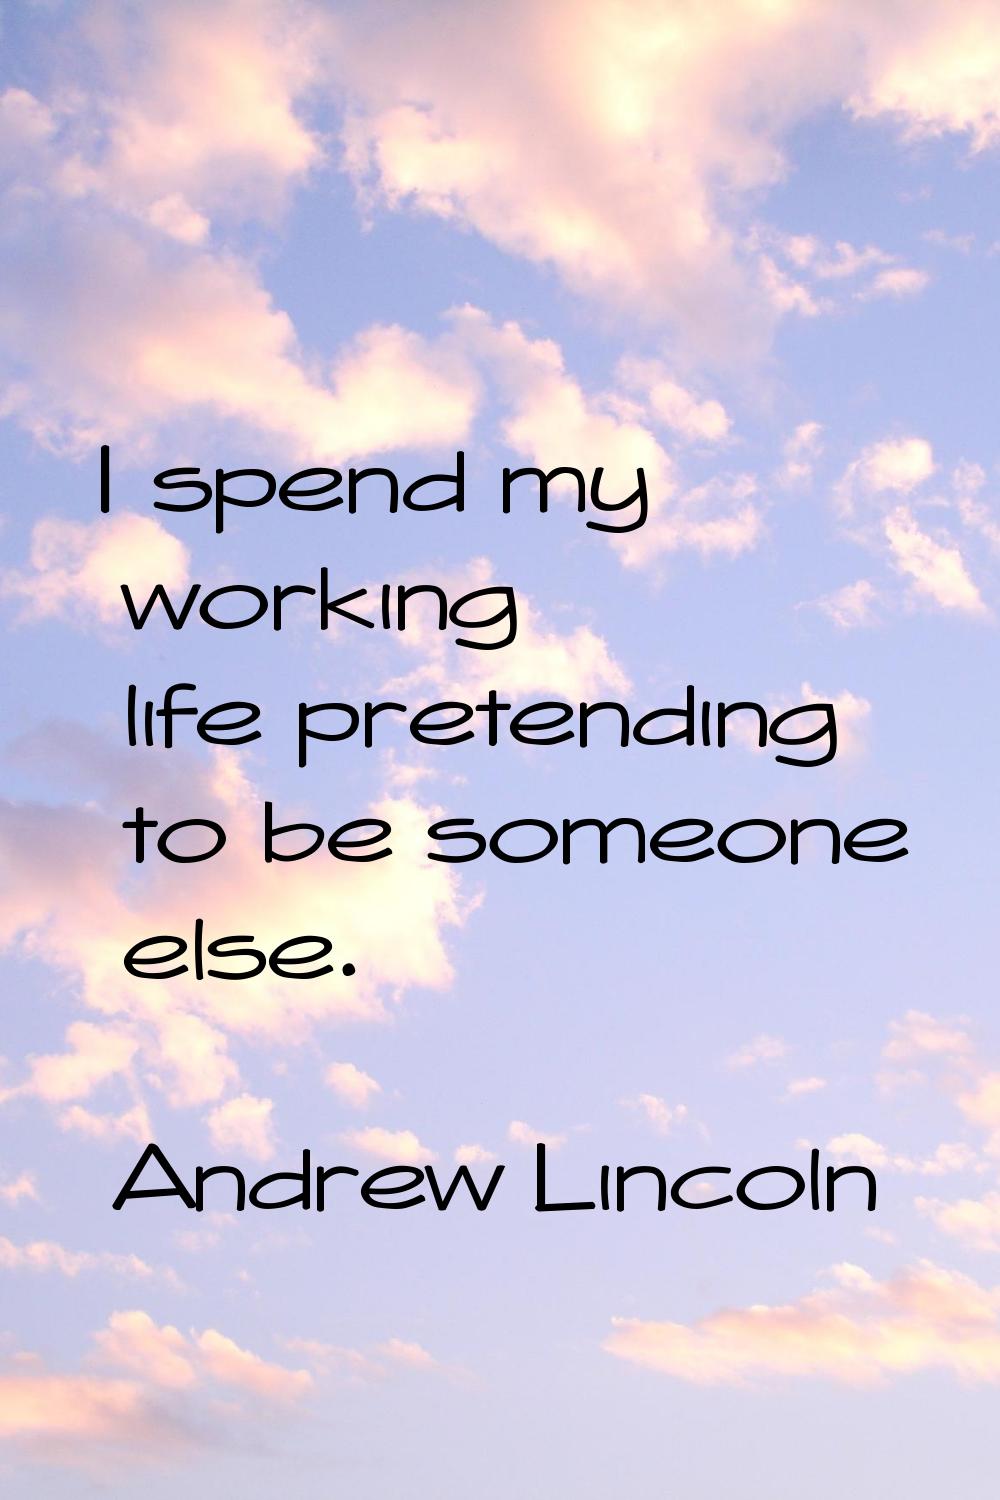 I spend my working life pretending to be someone else.